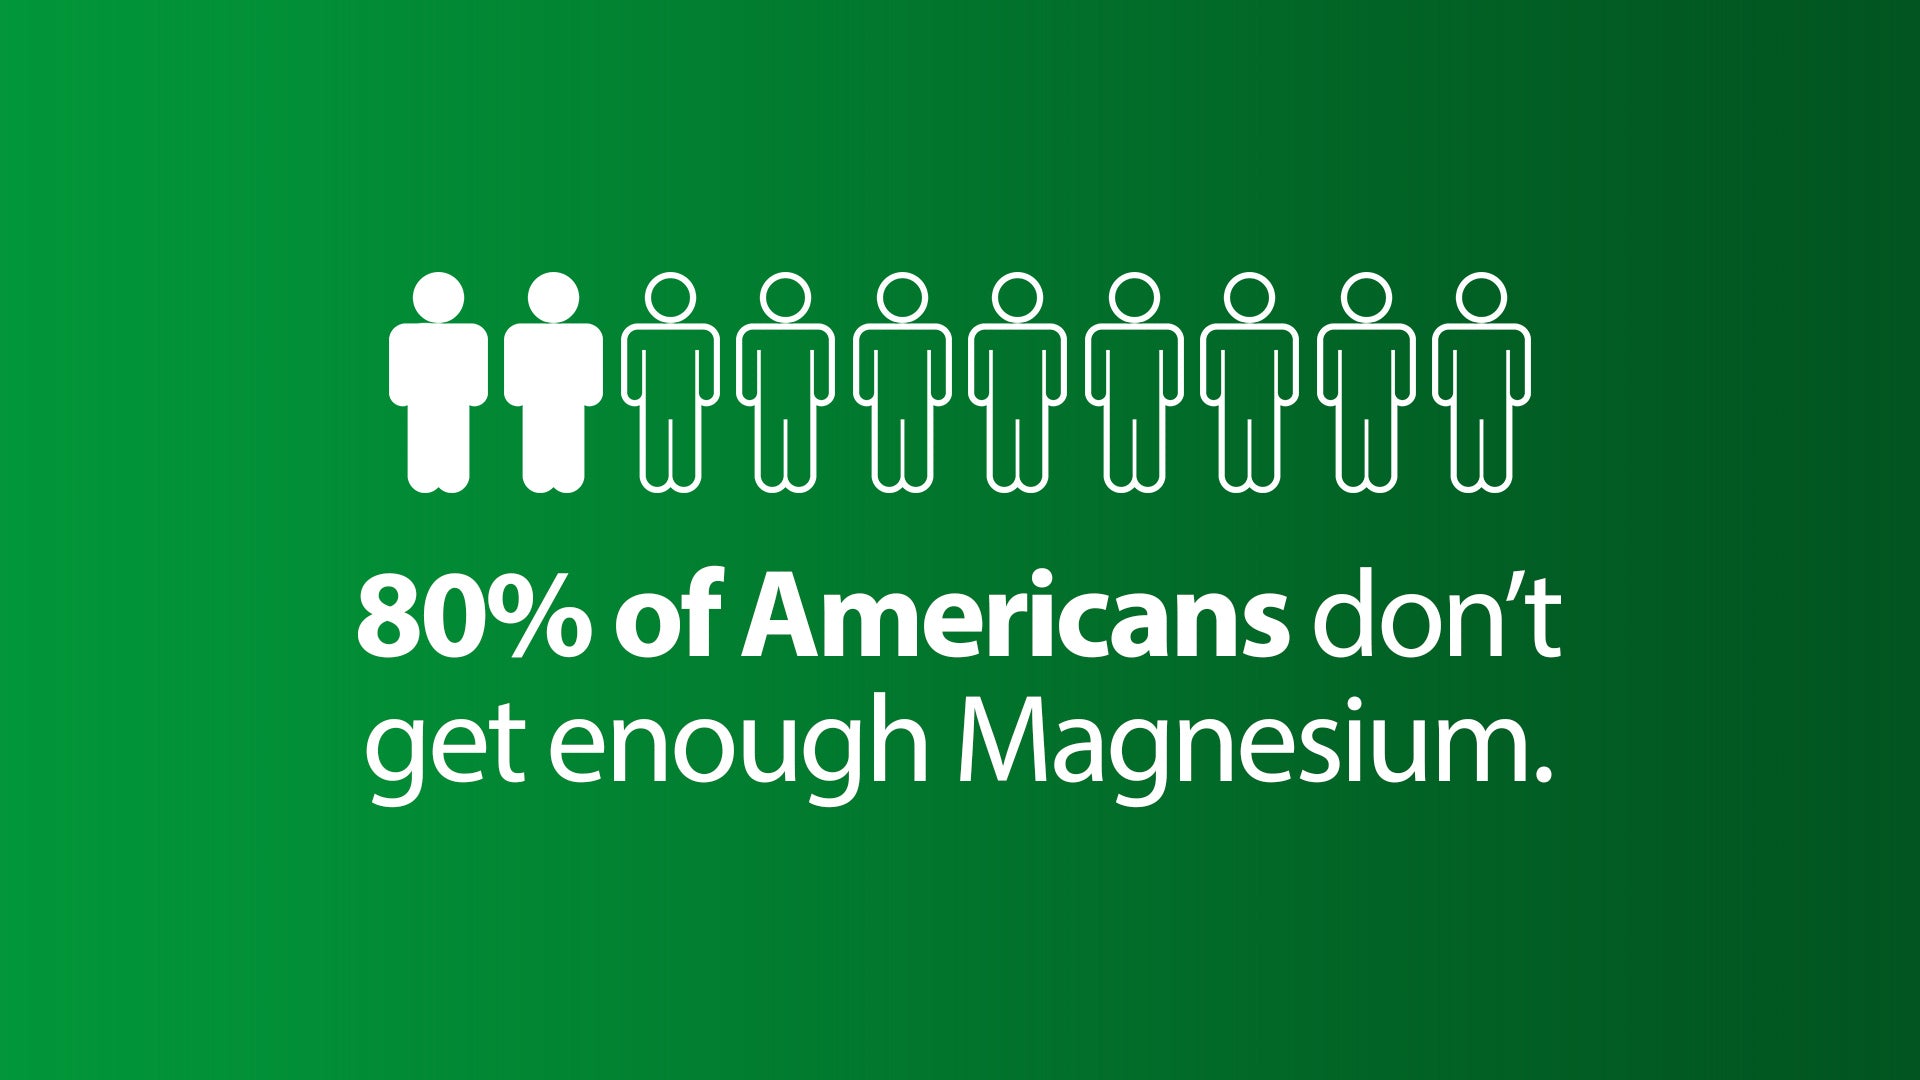 80% of Americans don't get enough Magnesium